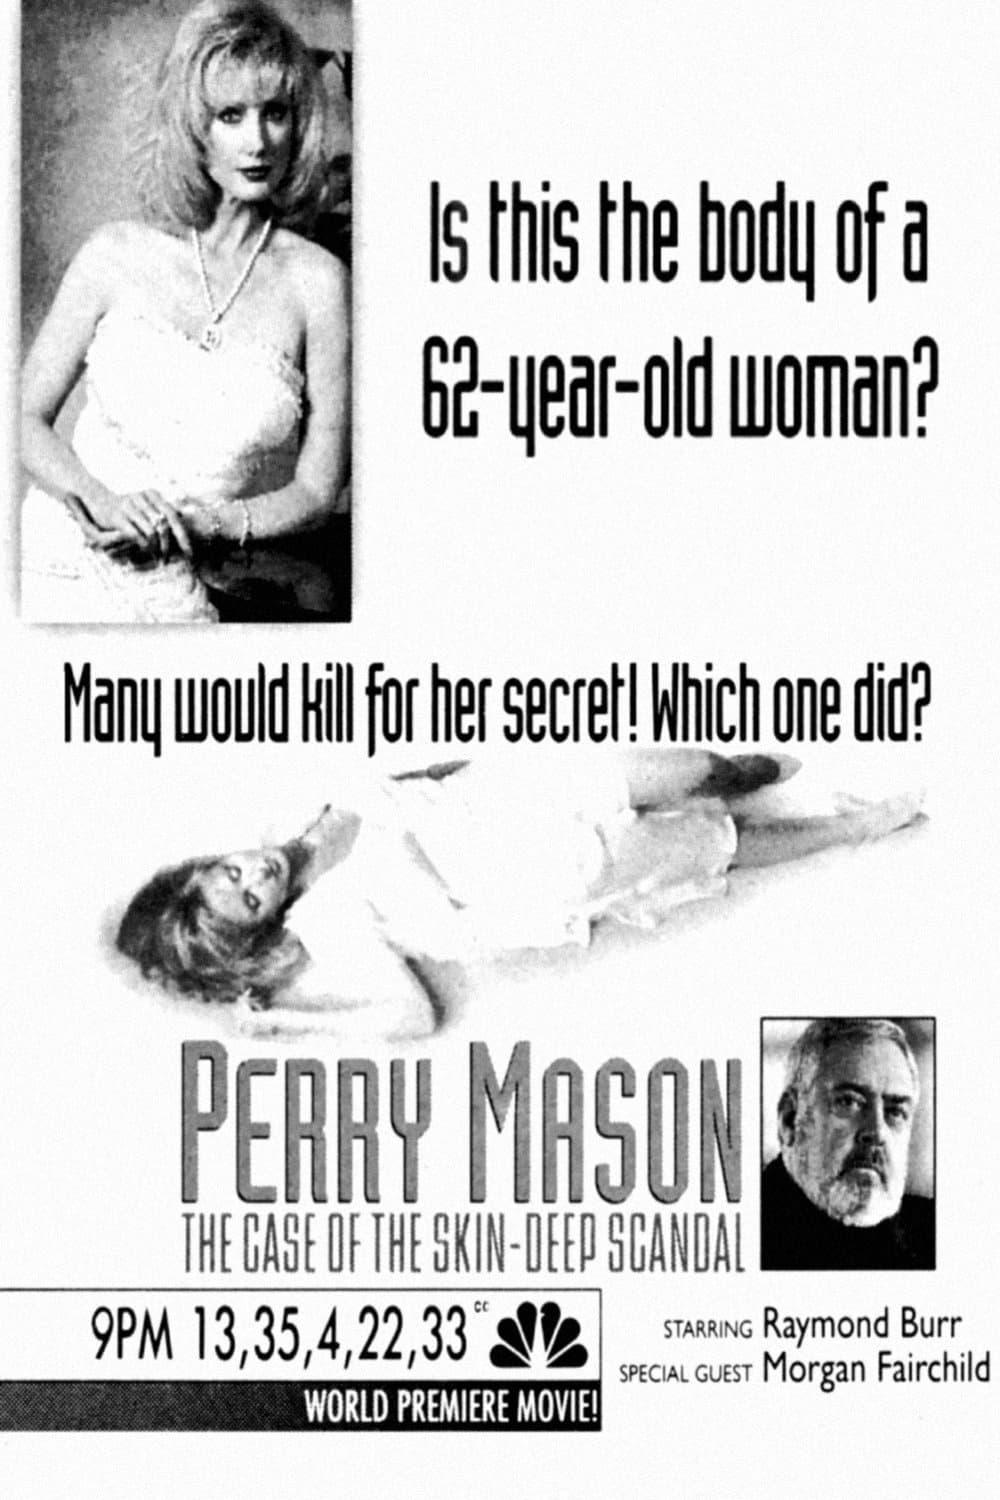 Perry Mason: The Case of the Skin-Deep Scandal poster